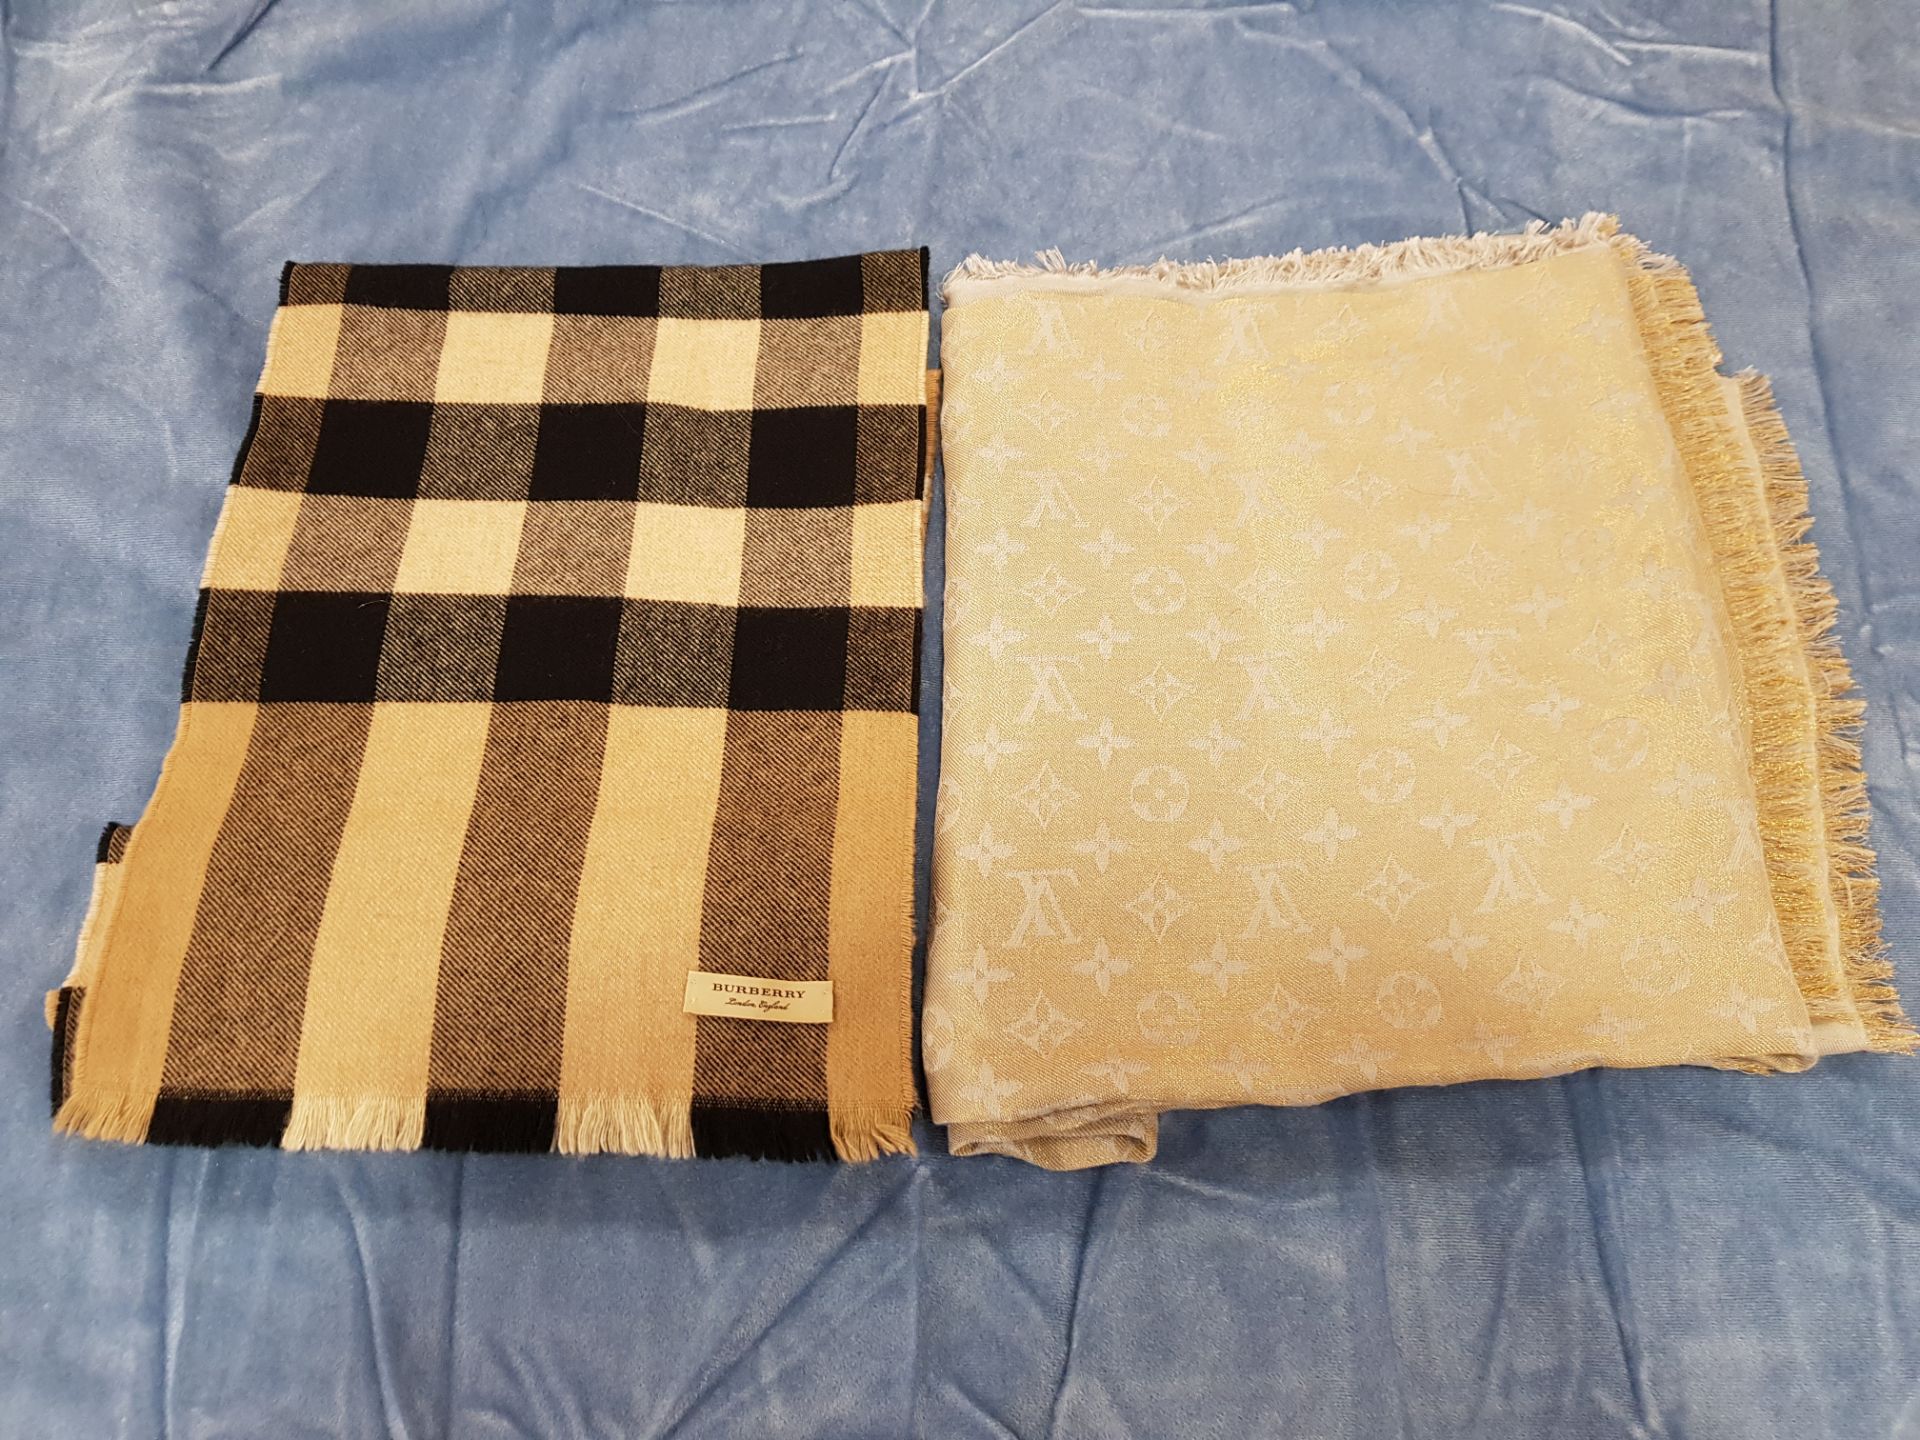 1 X LOUIS VUITTON SCARF GOLD AND SILVER COLOURED AND 1 X BURBERRY BROWN AND BLACK CHECK COLOURED